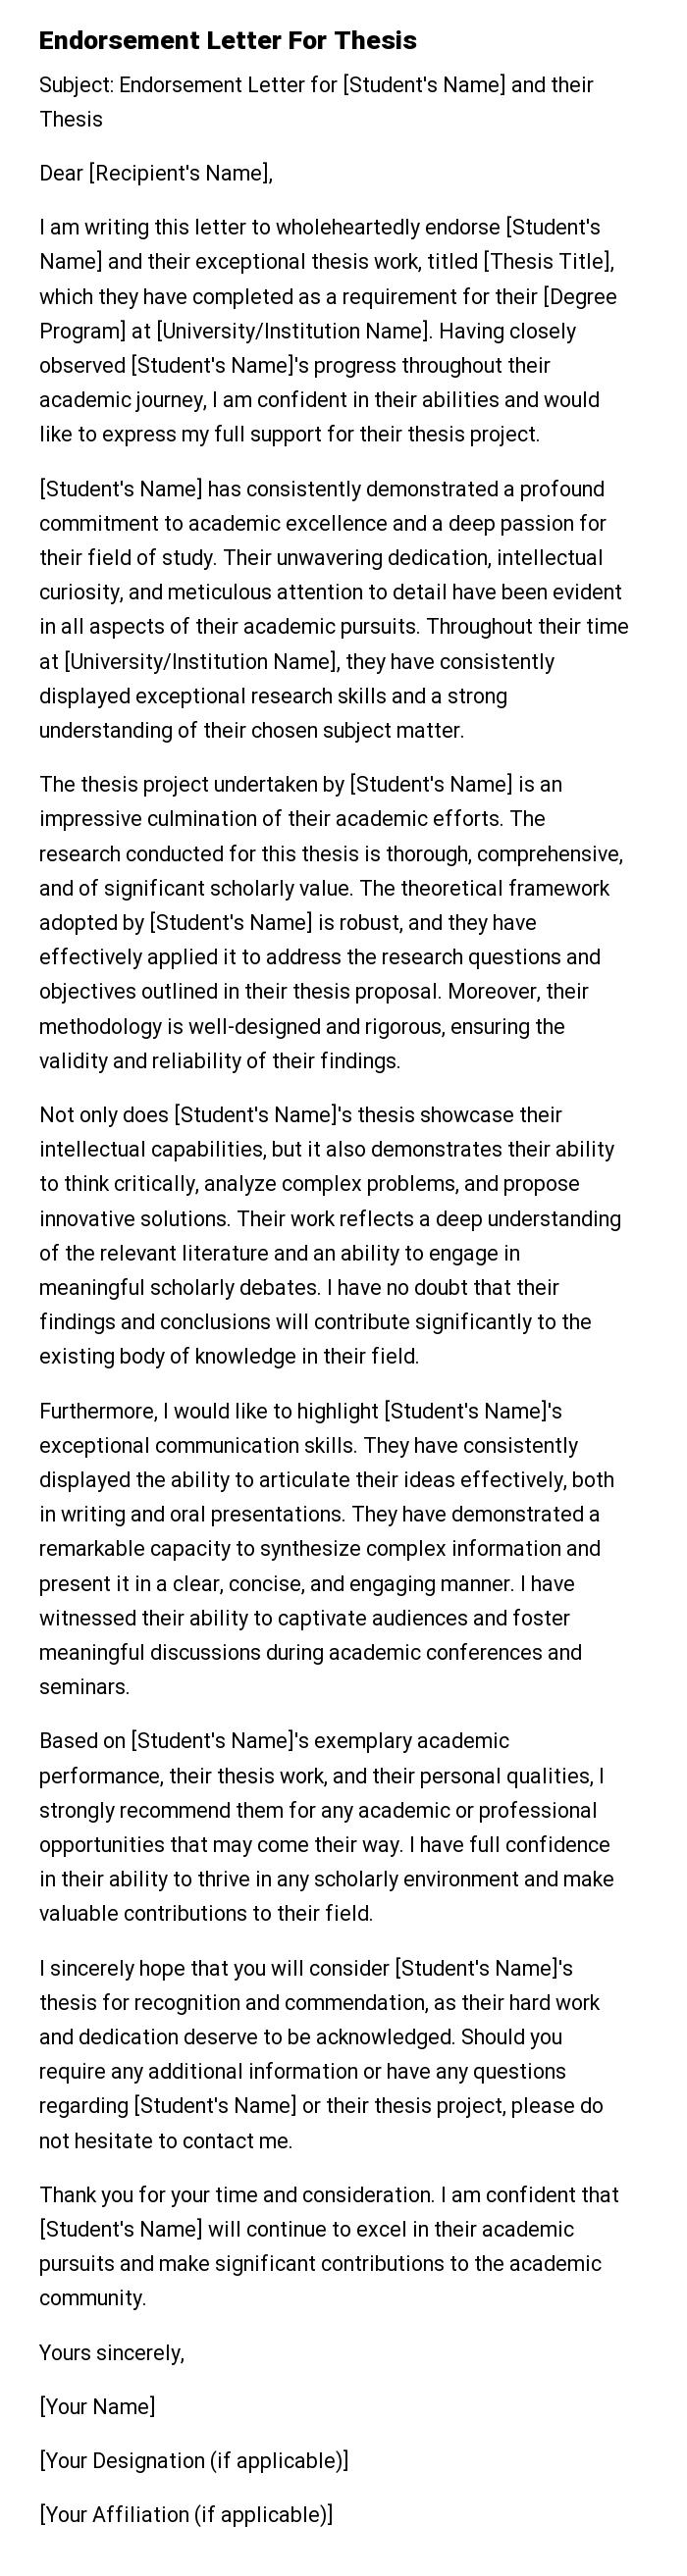 Endorsement Letter For Thesis